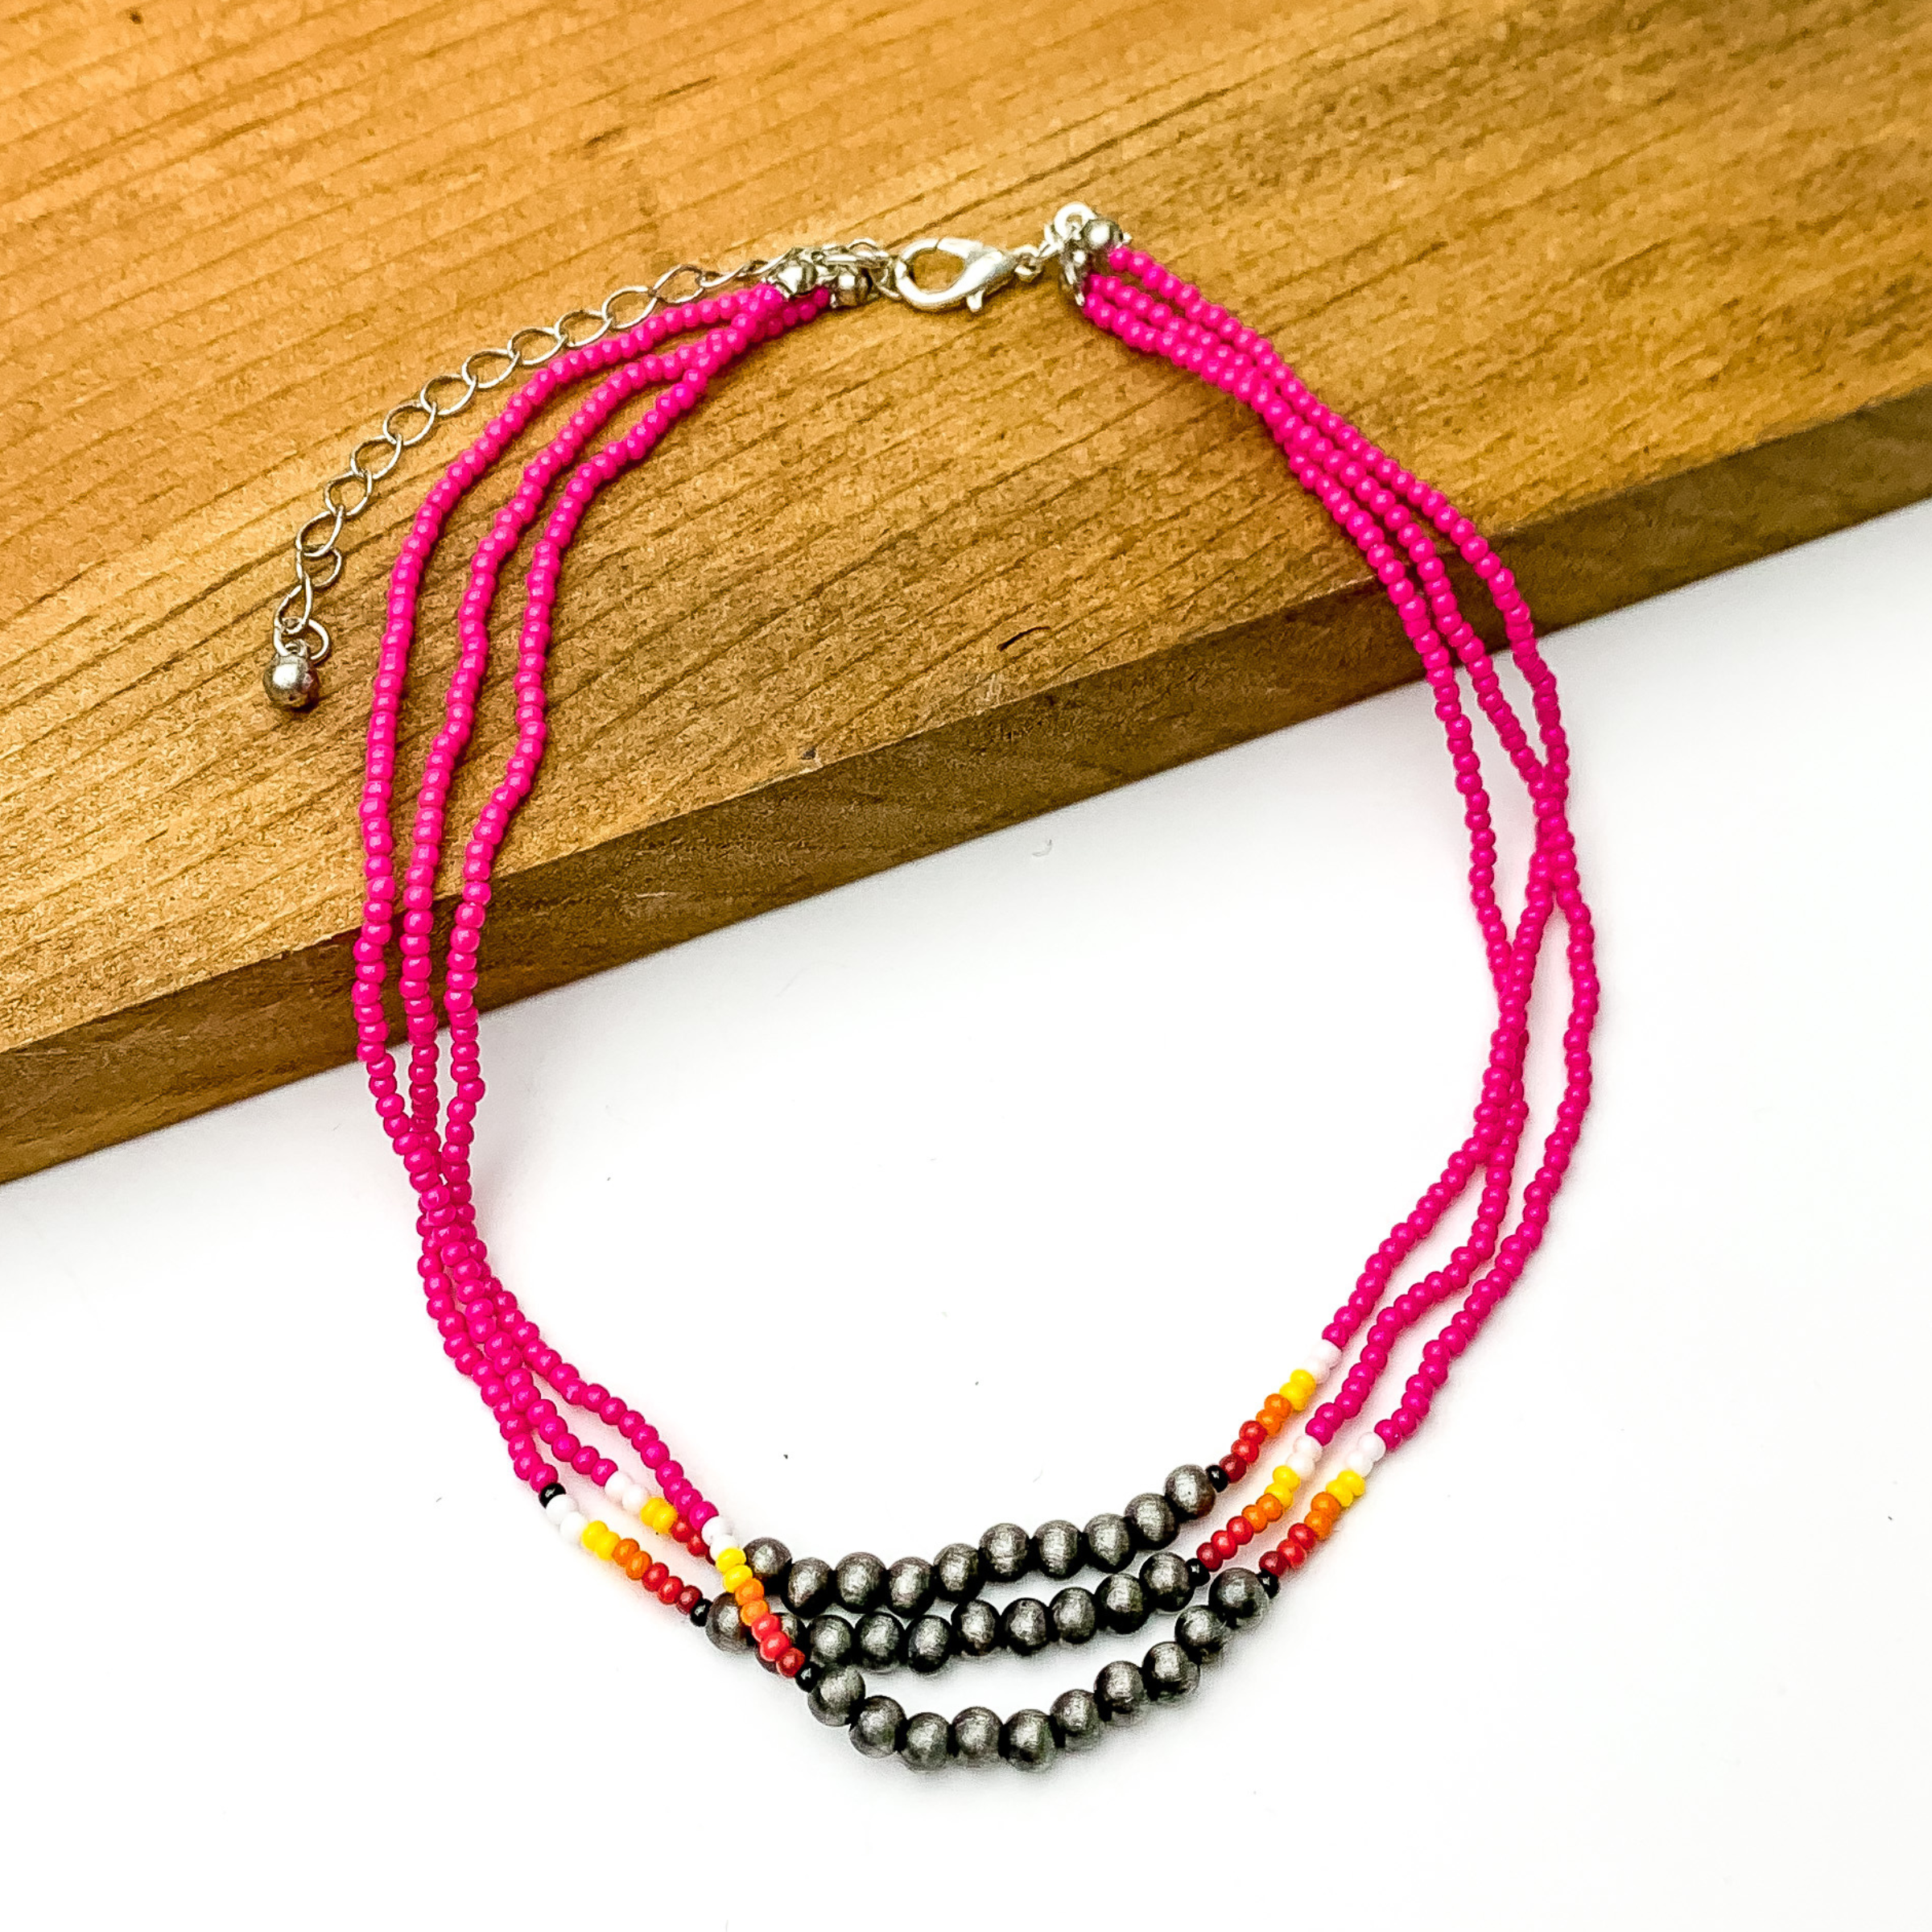 Three stranded necklace with mostly pink beads. This necklace also includes a segment of silver beads on each strand with a couple white, red, and orange beads on each side of the segment. This necklace is pictured partially on a block of wood on a white background.  